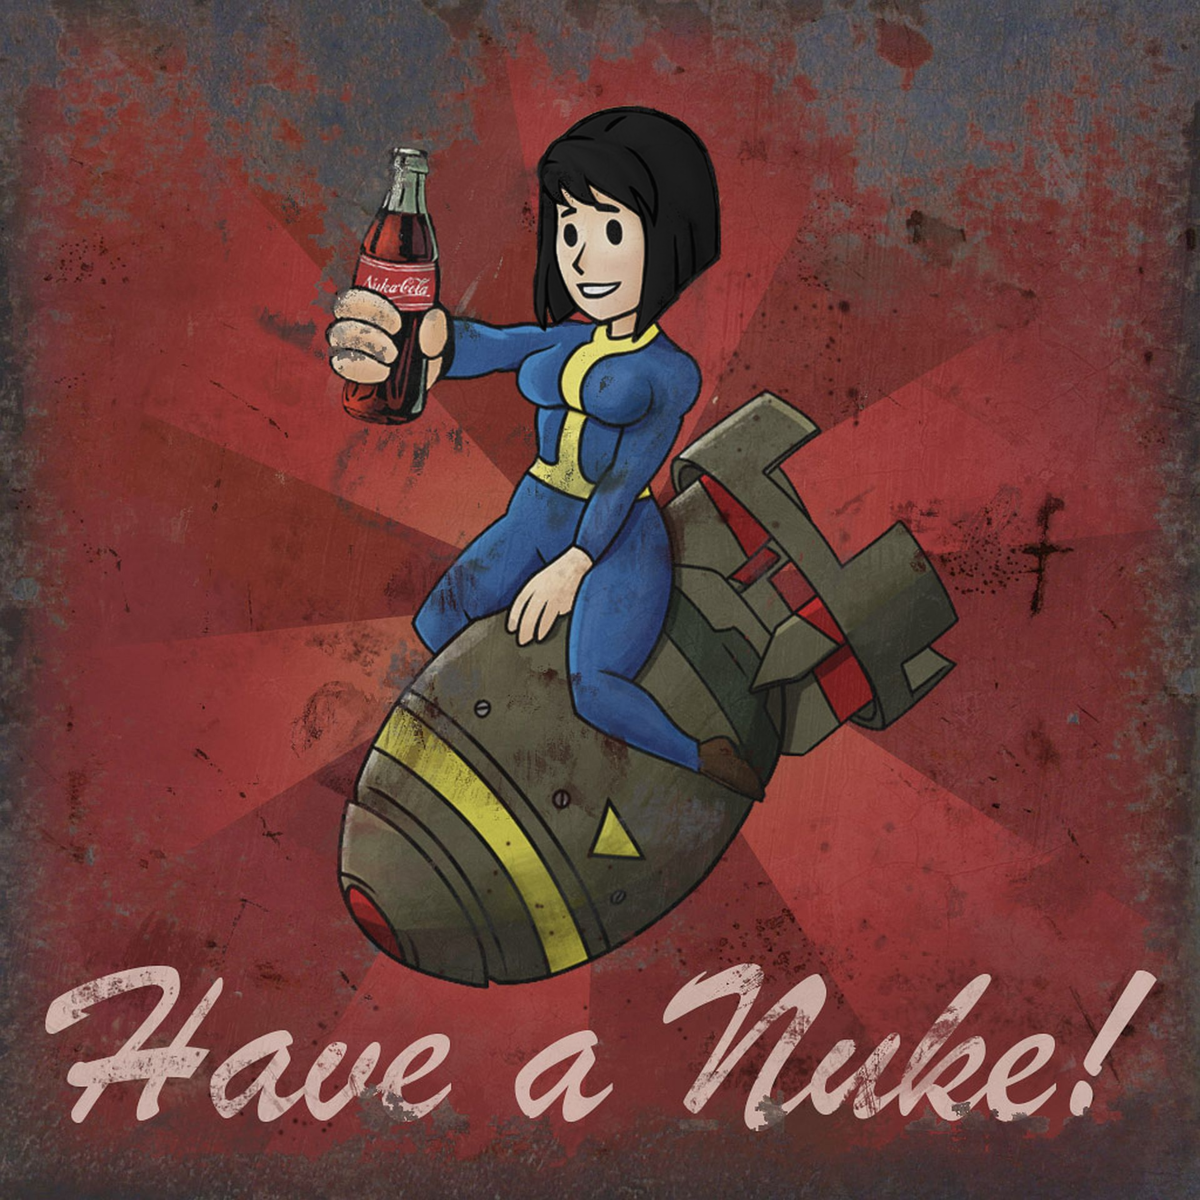 Nuka Cola Fallout девушка. Фоллаут Ваулт герл. Fallout 3 плакаты ВОЛТЕК. Фоллаут 4 Vault girl.